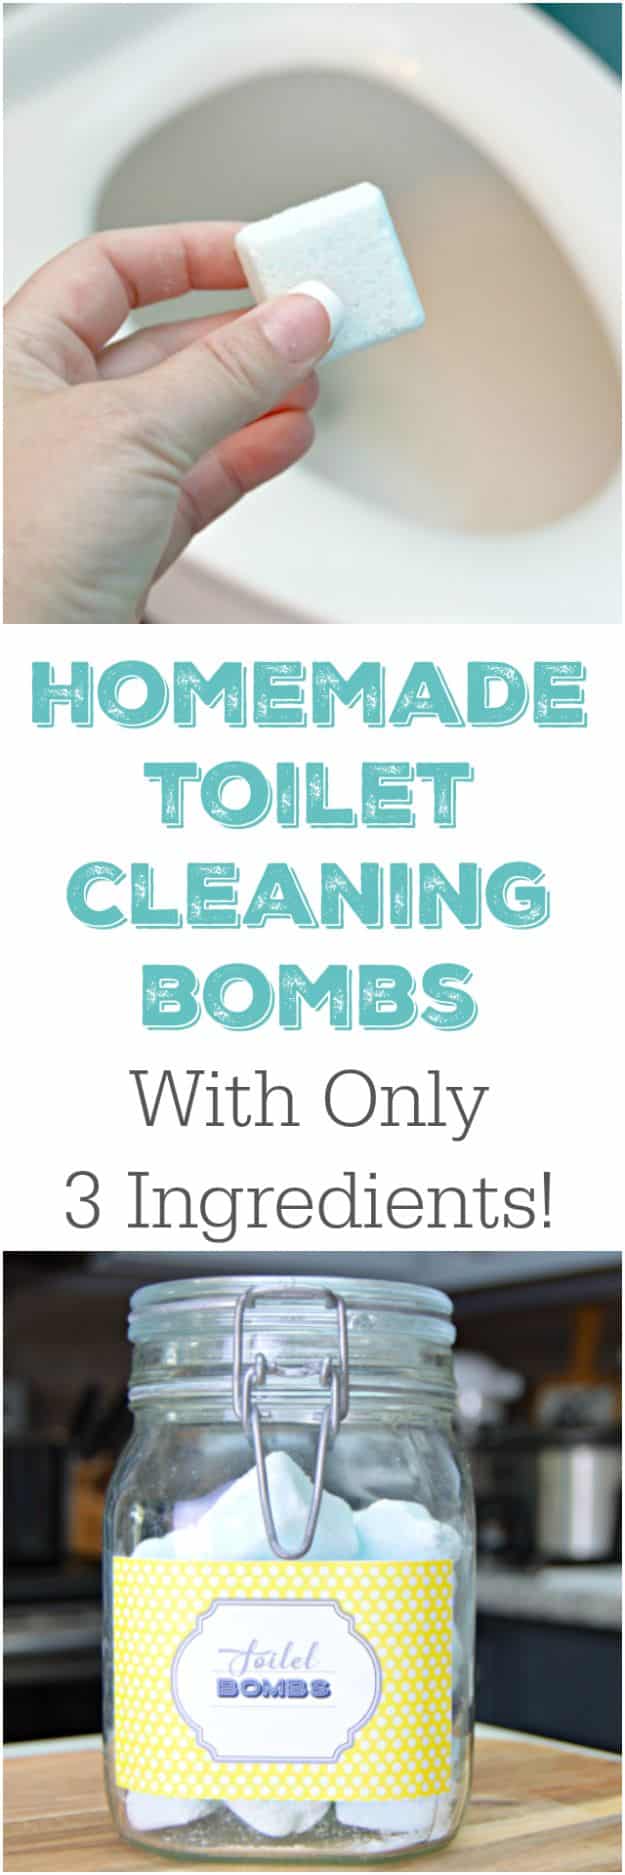 Homemade Cleaning Products - 3 Ingredient Homemade Toilet Cleaning Bombs - DIY Cleaners With Recipe and Tutorial - Make DIY Natural and ll Purpose Cleaner Recipes for Home With Vinegar, Essential Oils